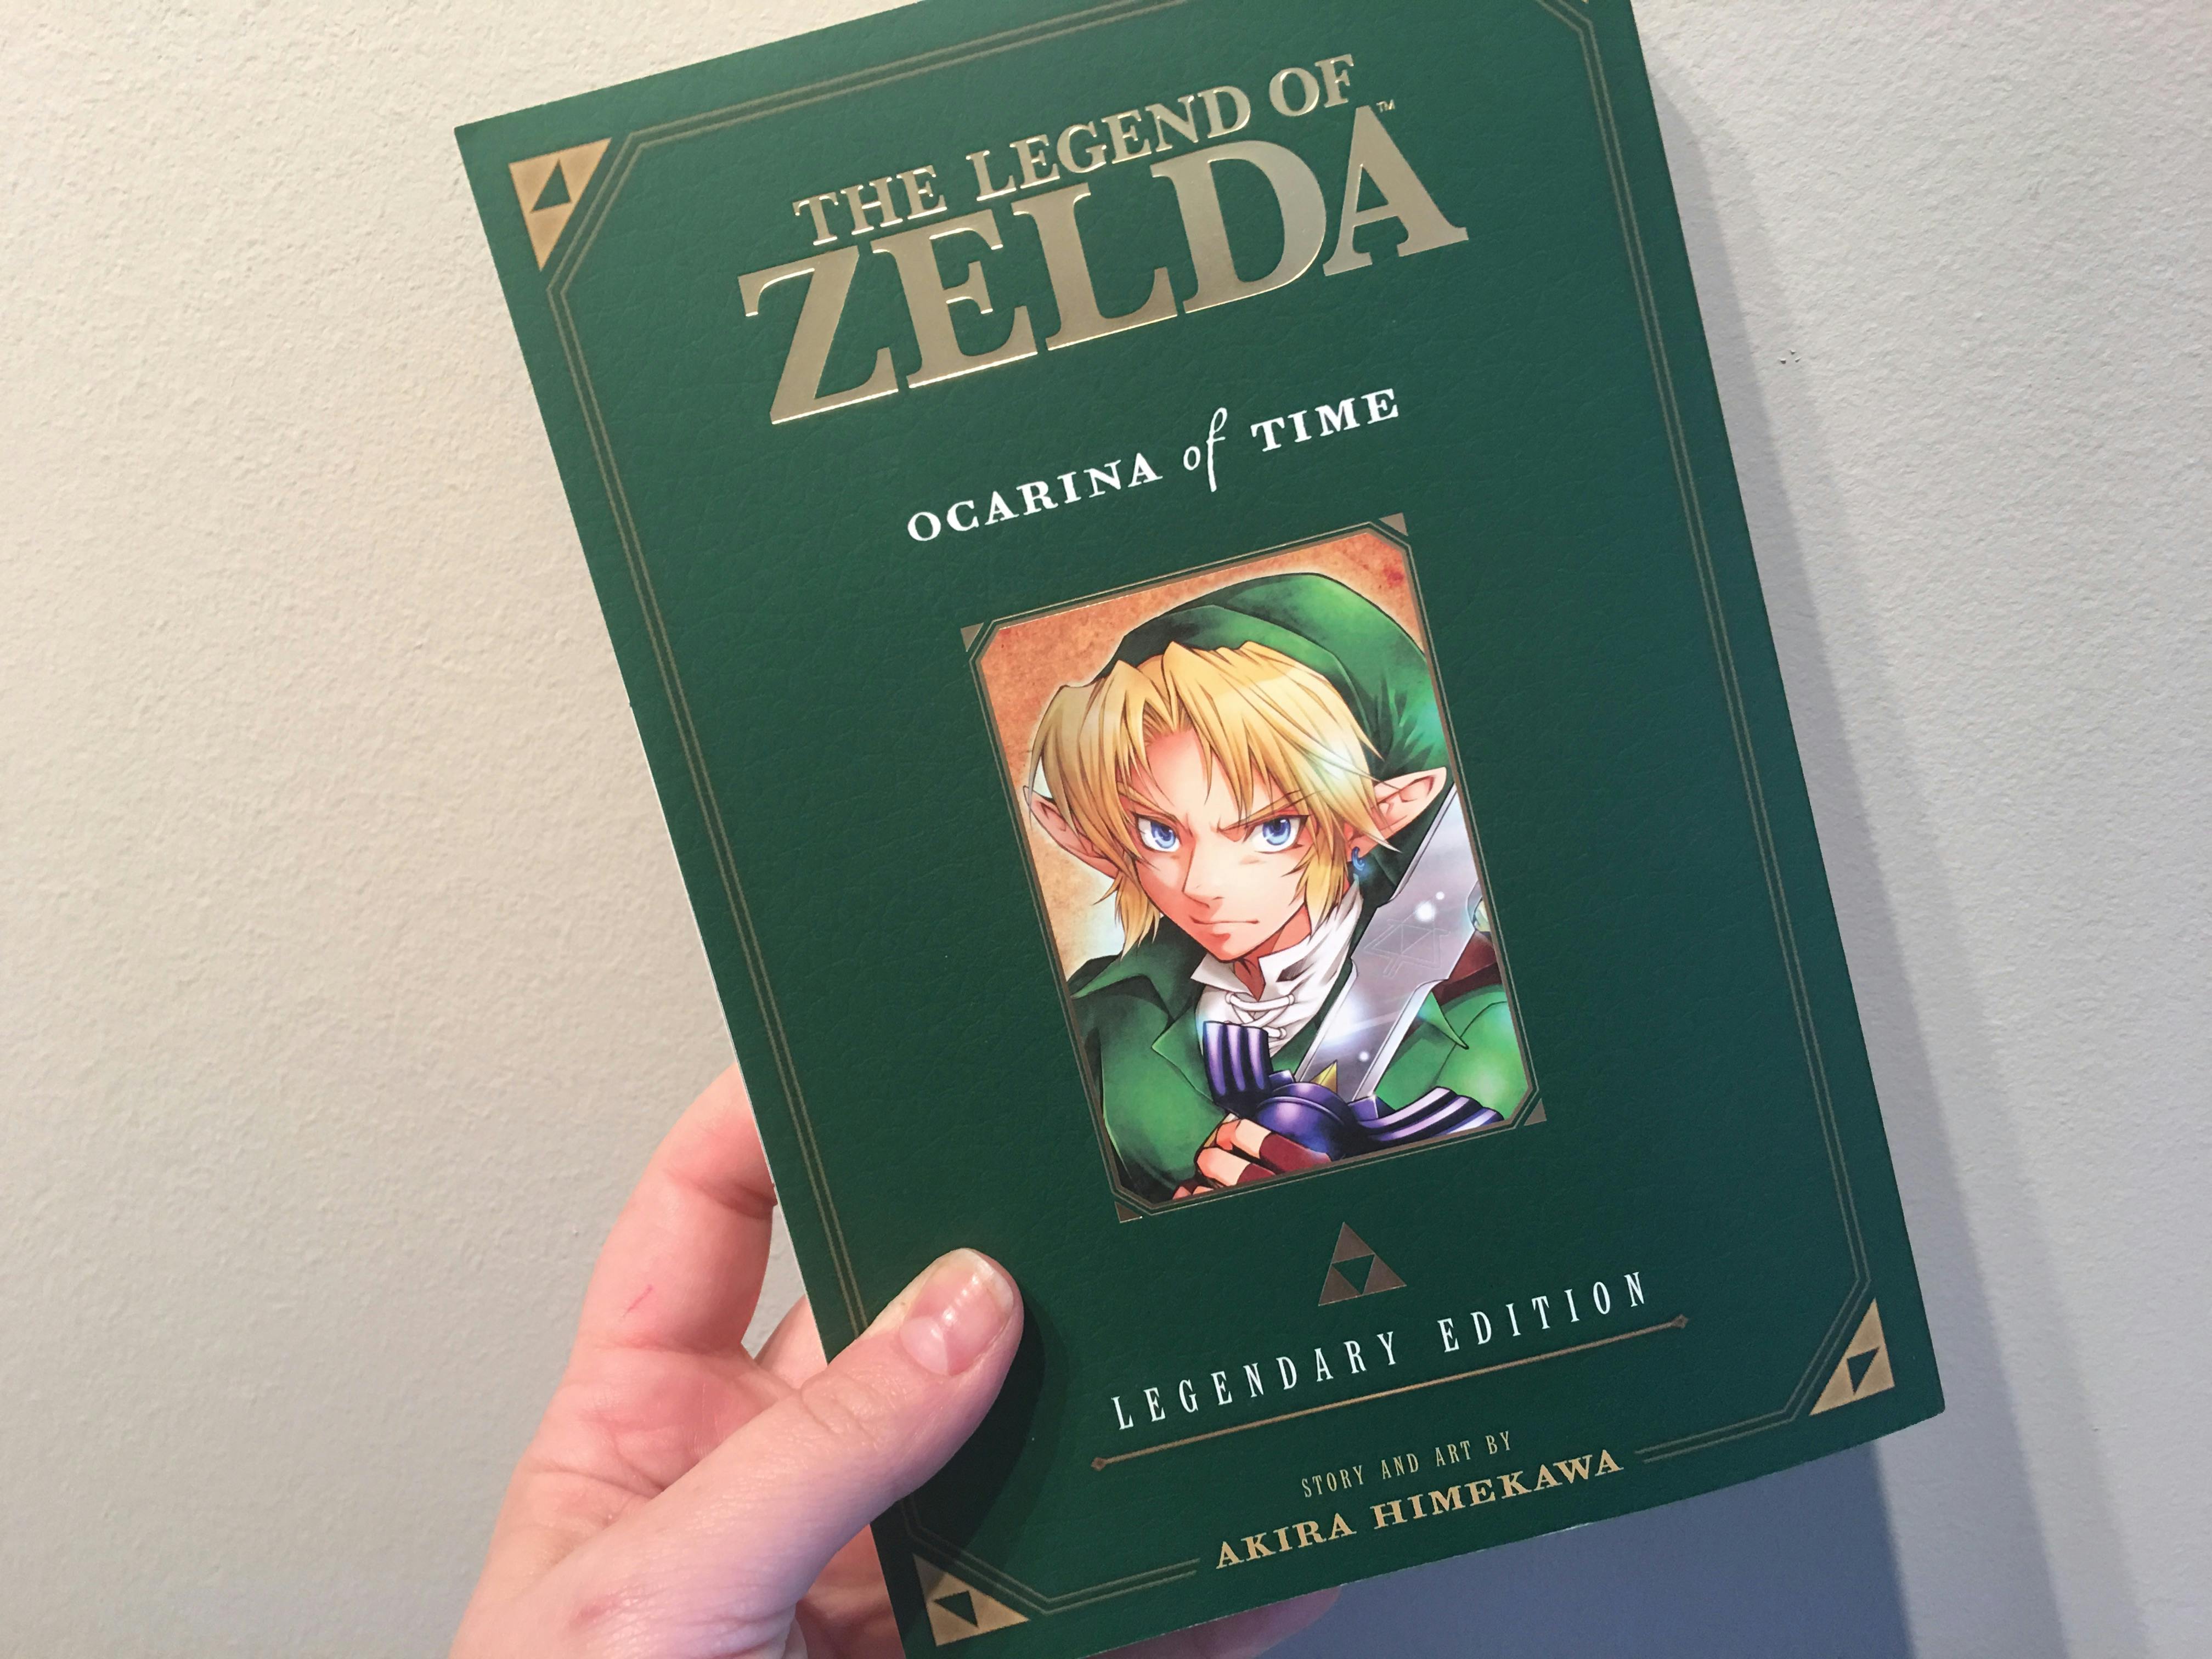 Yep, looks like a Zelda tome with its rich green cover.